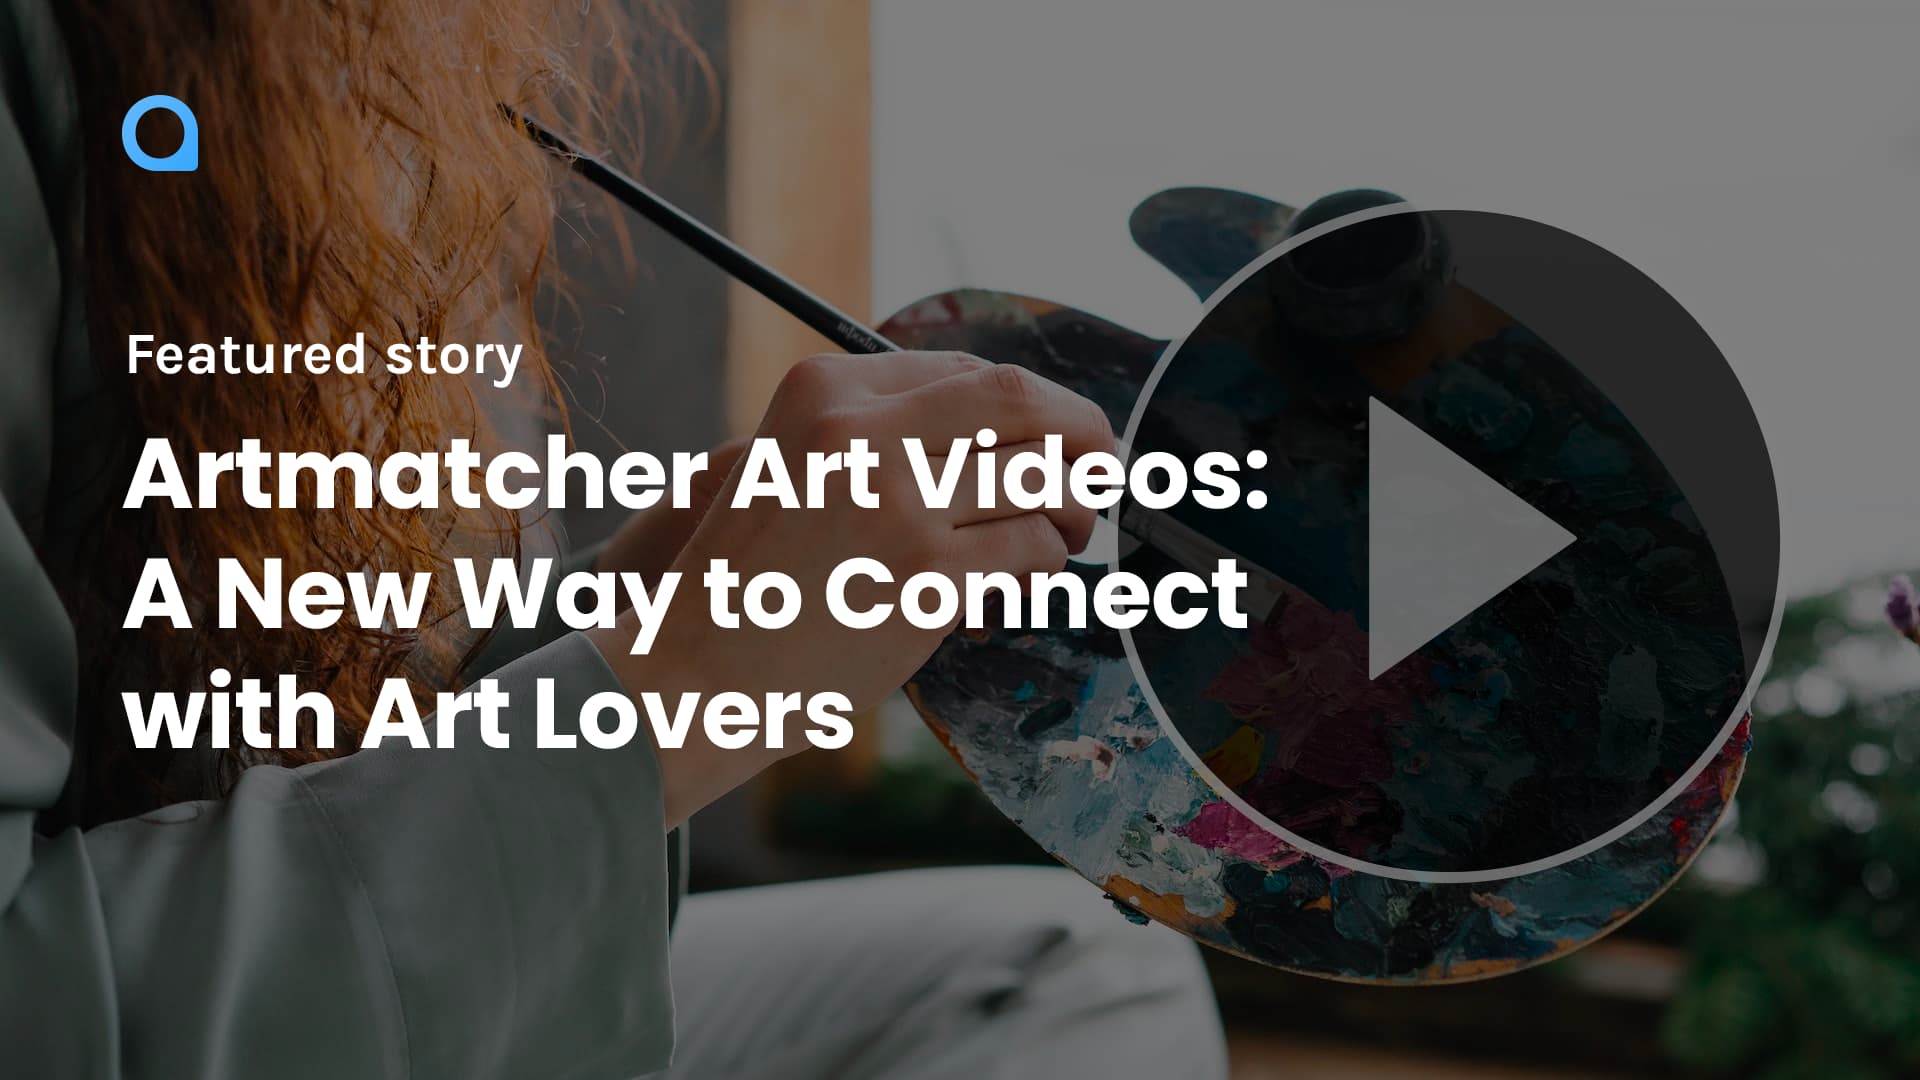 Artmatcher Art Videos: A New Way to Connect with Art Lovers